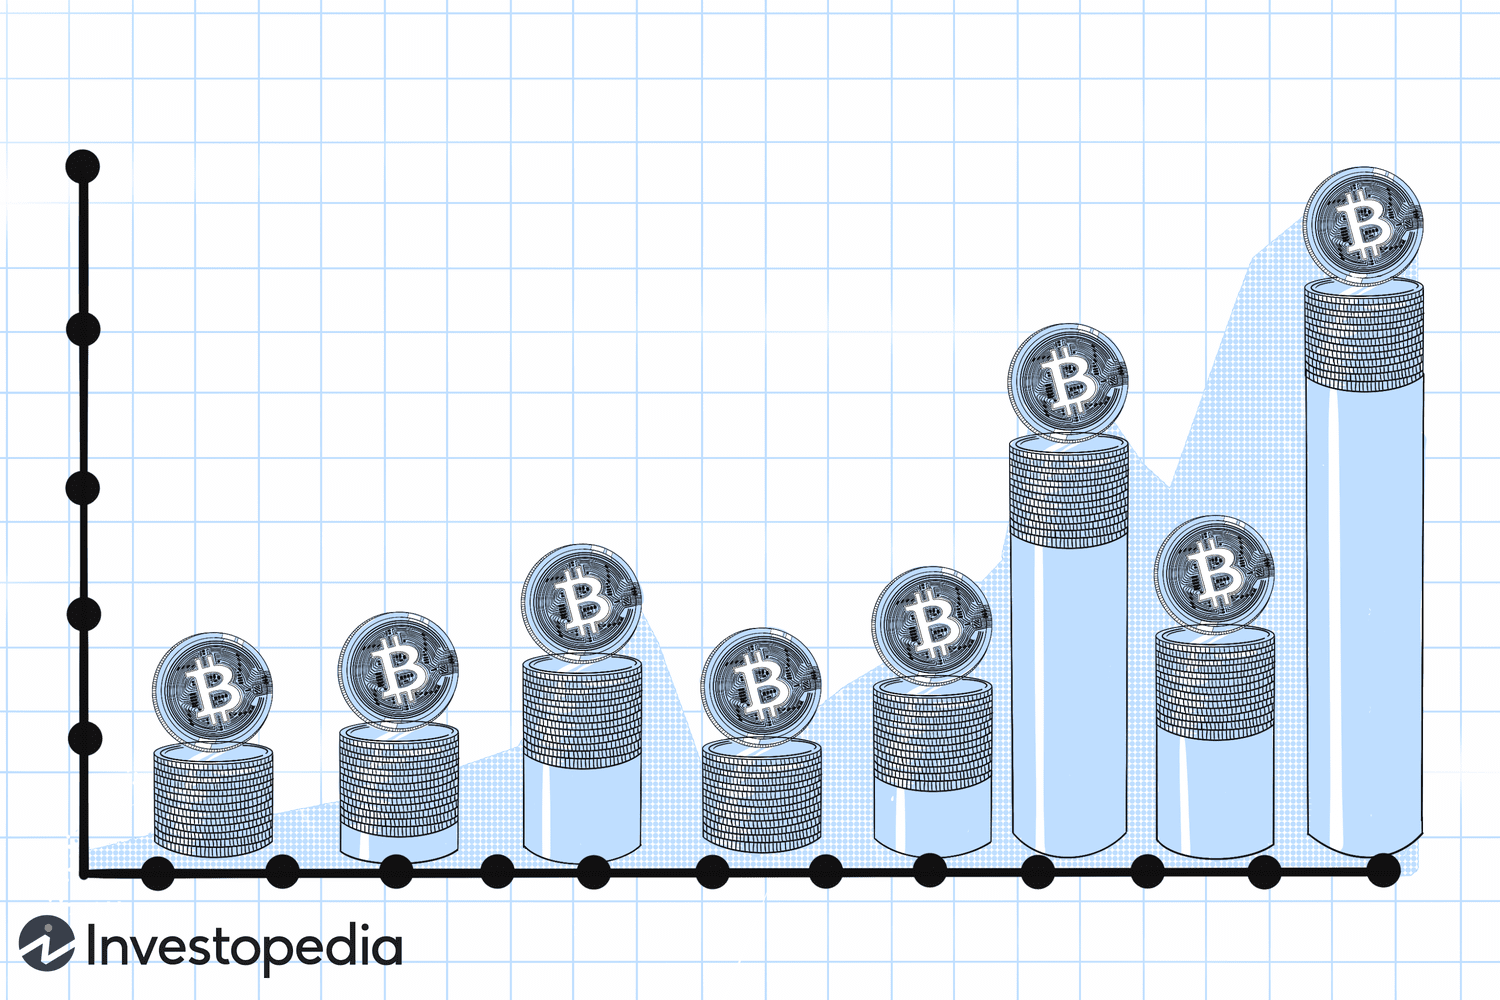 Bitcoin Price History - the value of 1 BTC over time - Comparitech